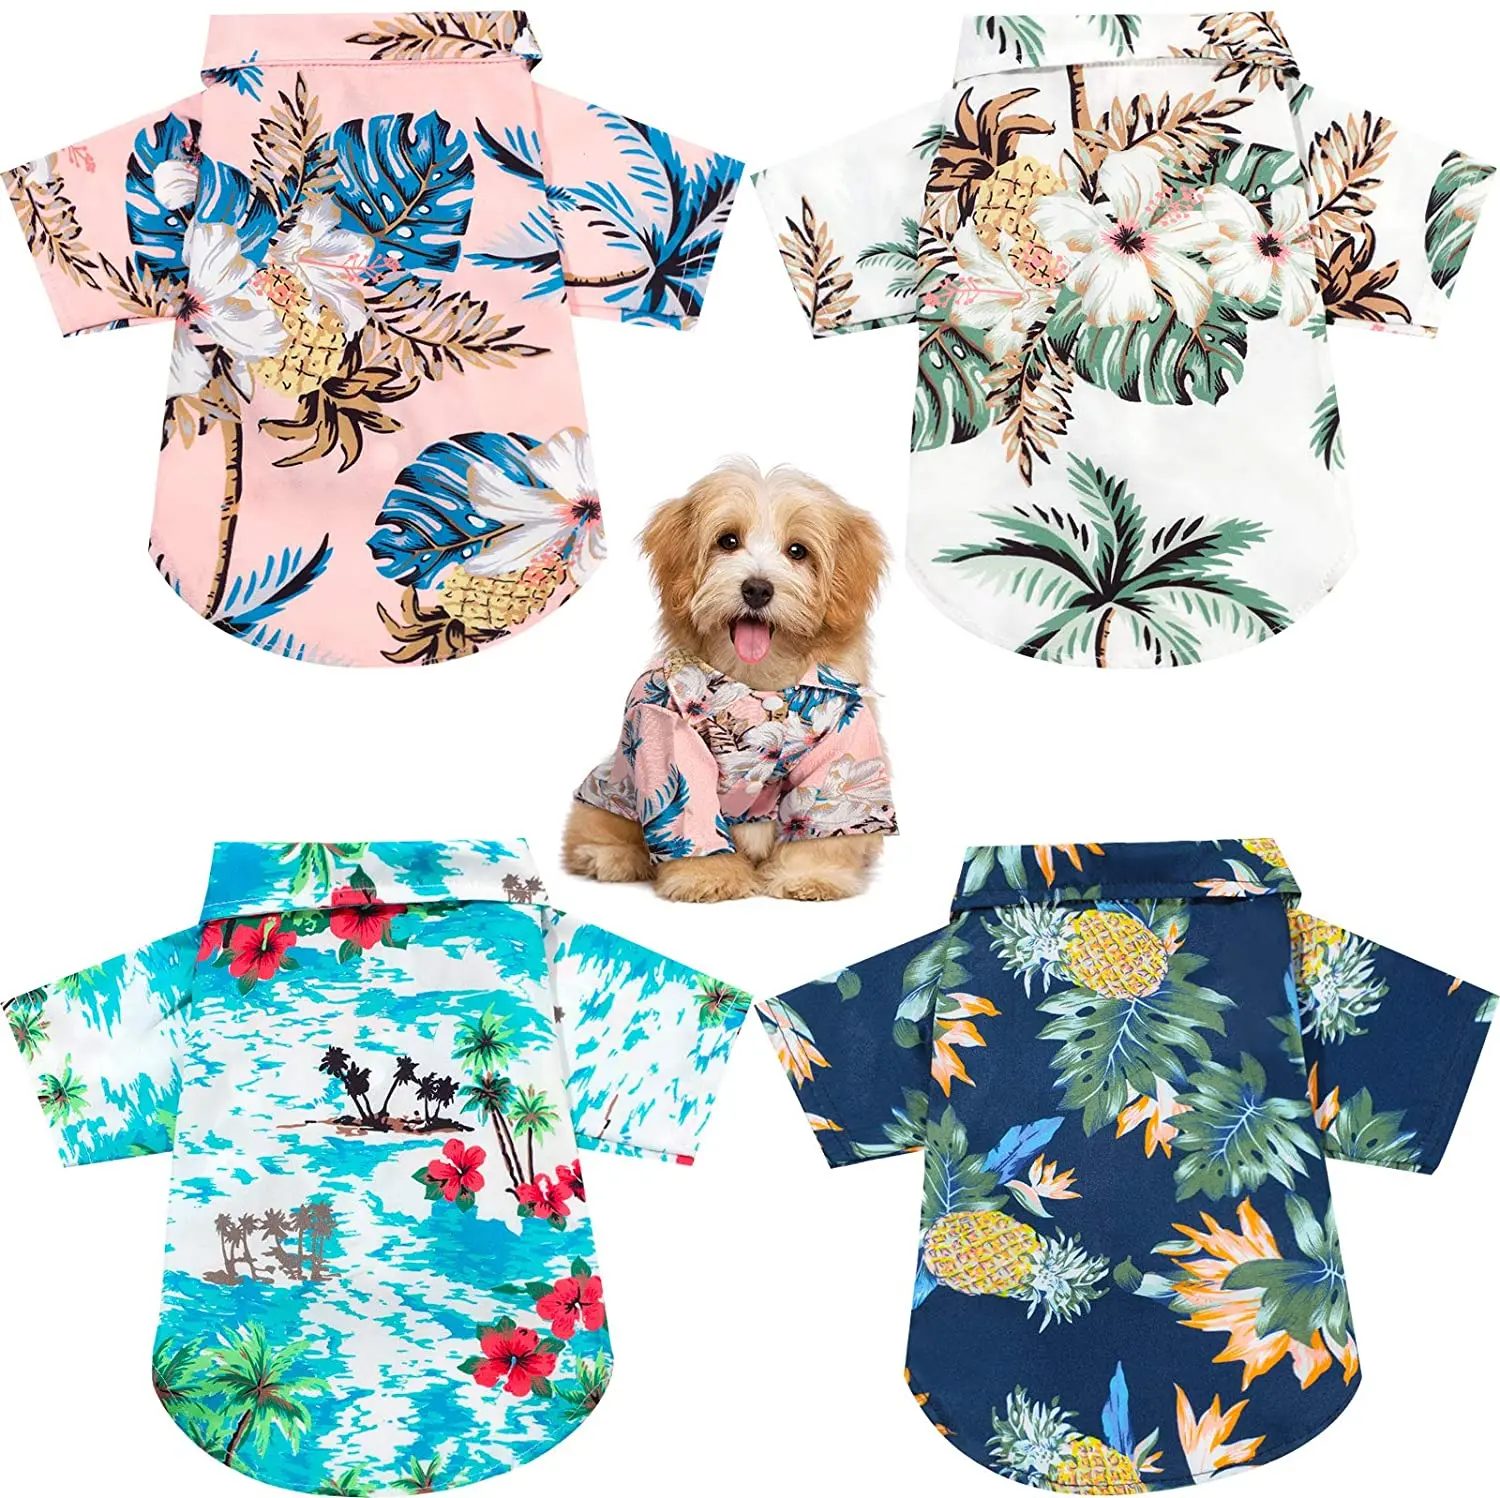 

Hawaiian Dog Shirt Summer Hawaii Style Breathable Floral Polo T-Shirts Cool Clothes for Small Medium Large Dogs Cats Pets